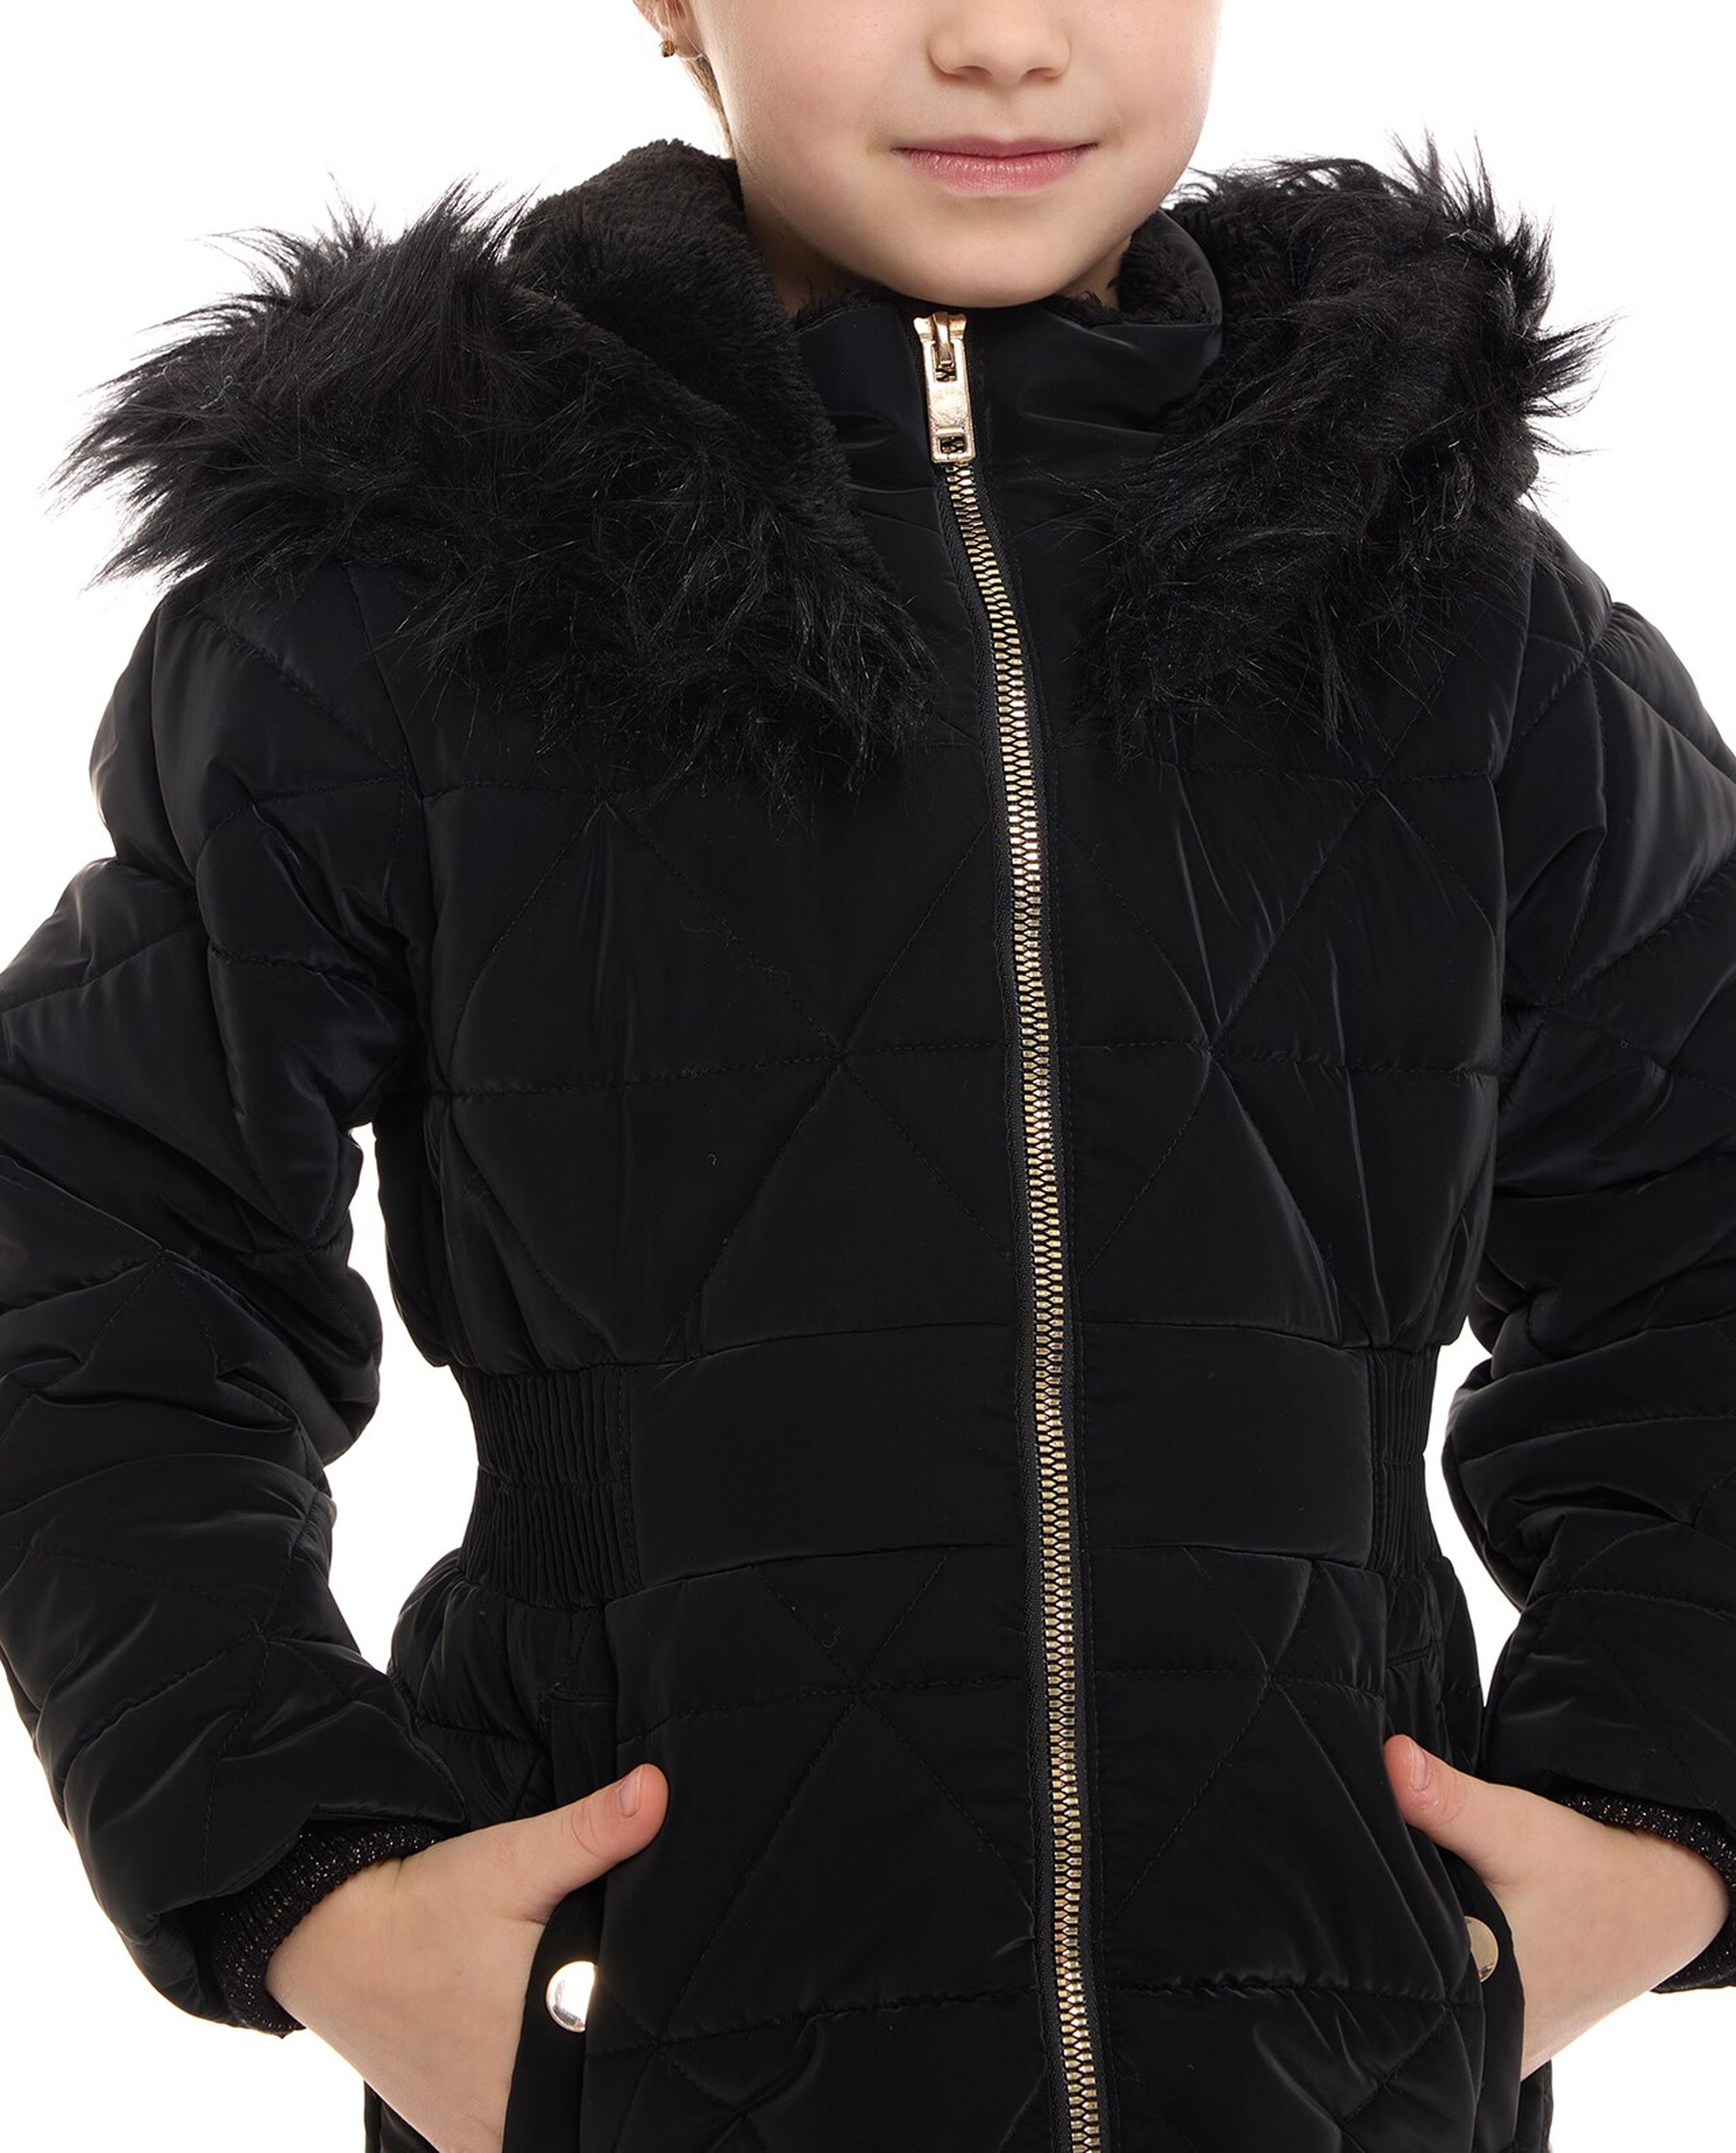 Furry Hooded Quilted Jacket with Zipper Closure